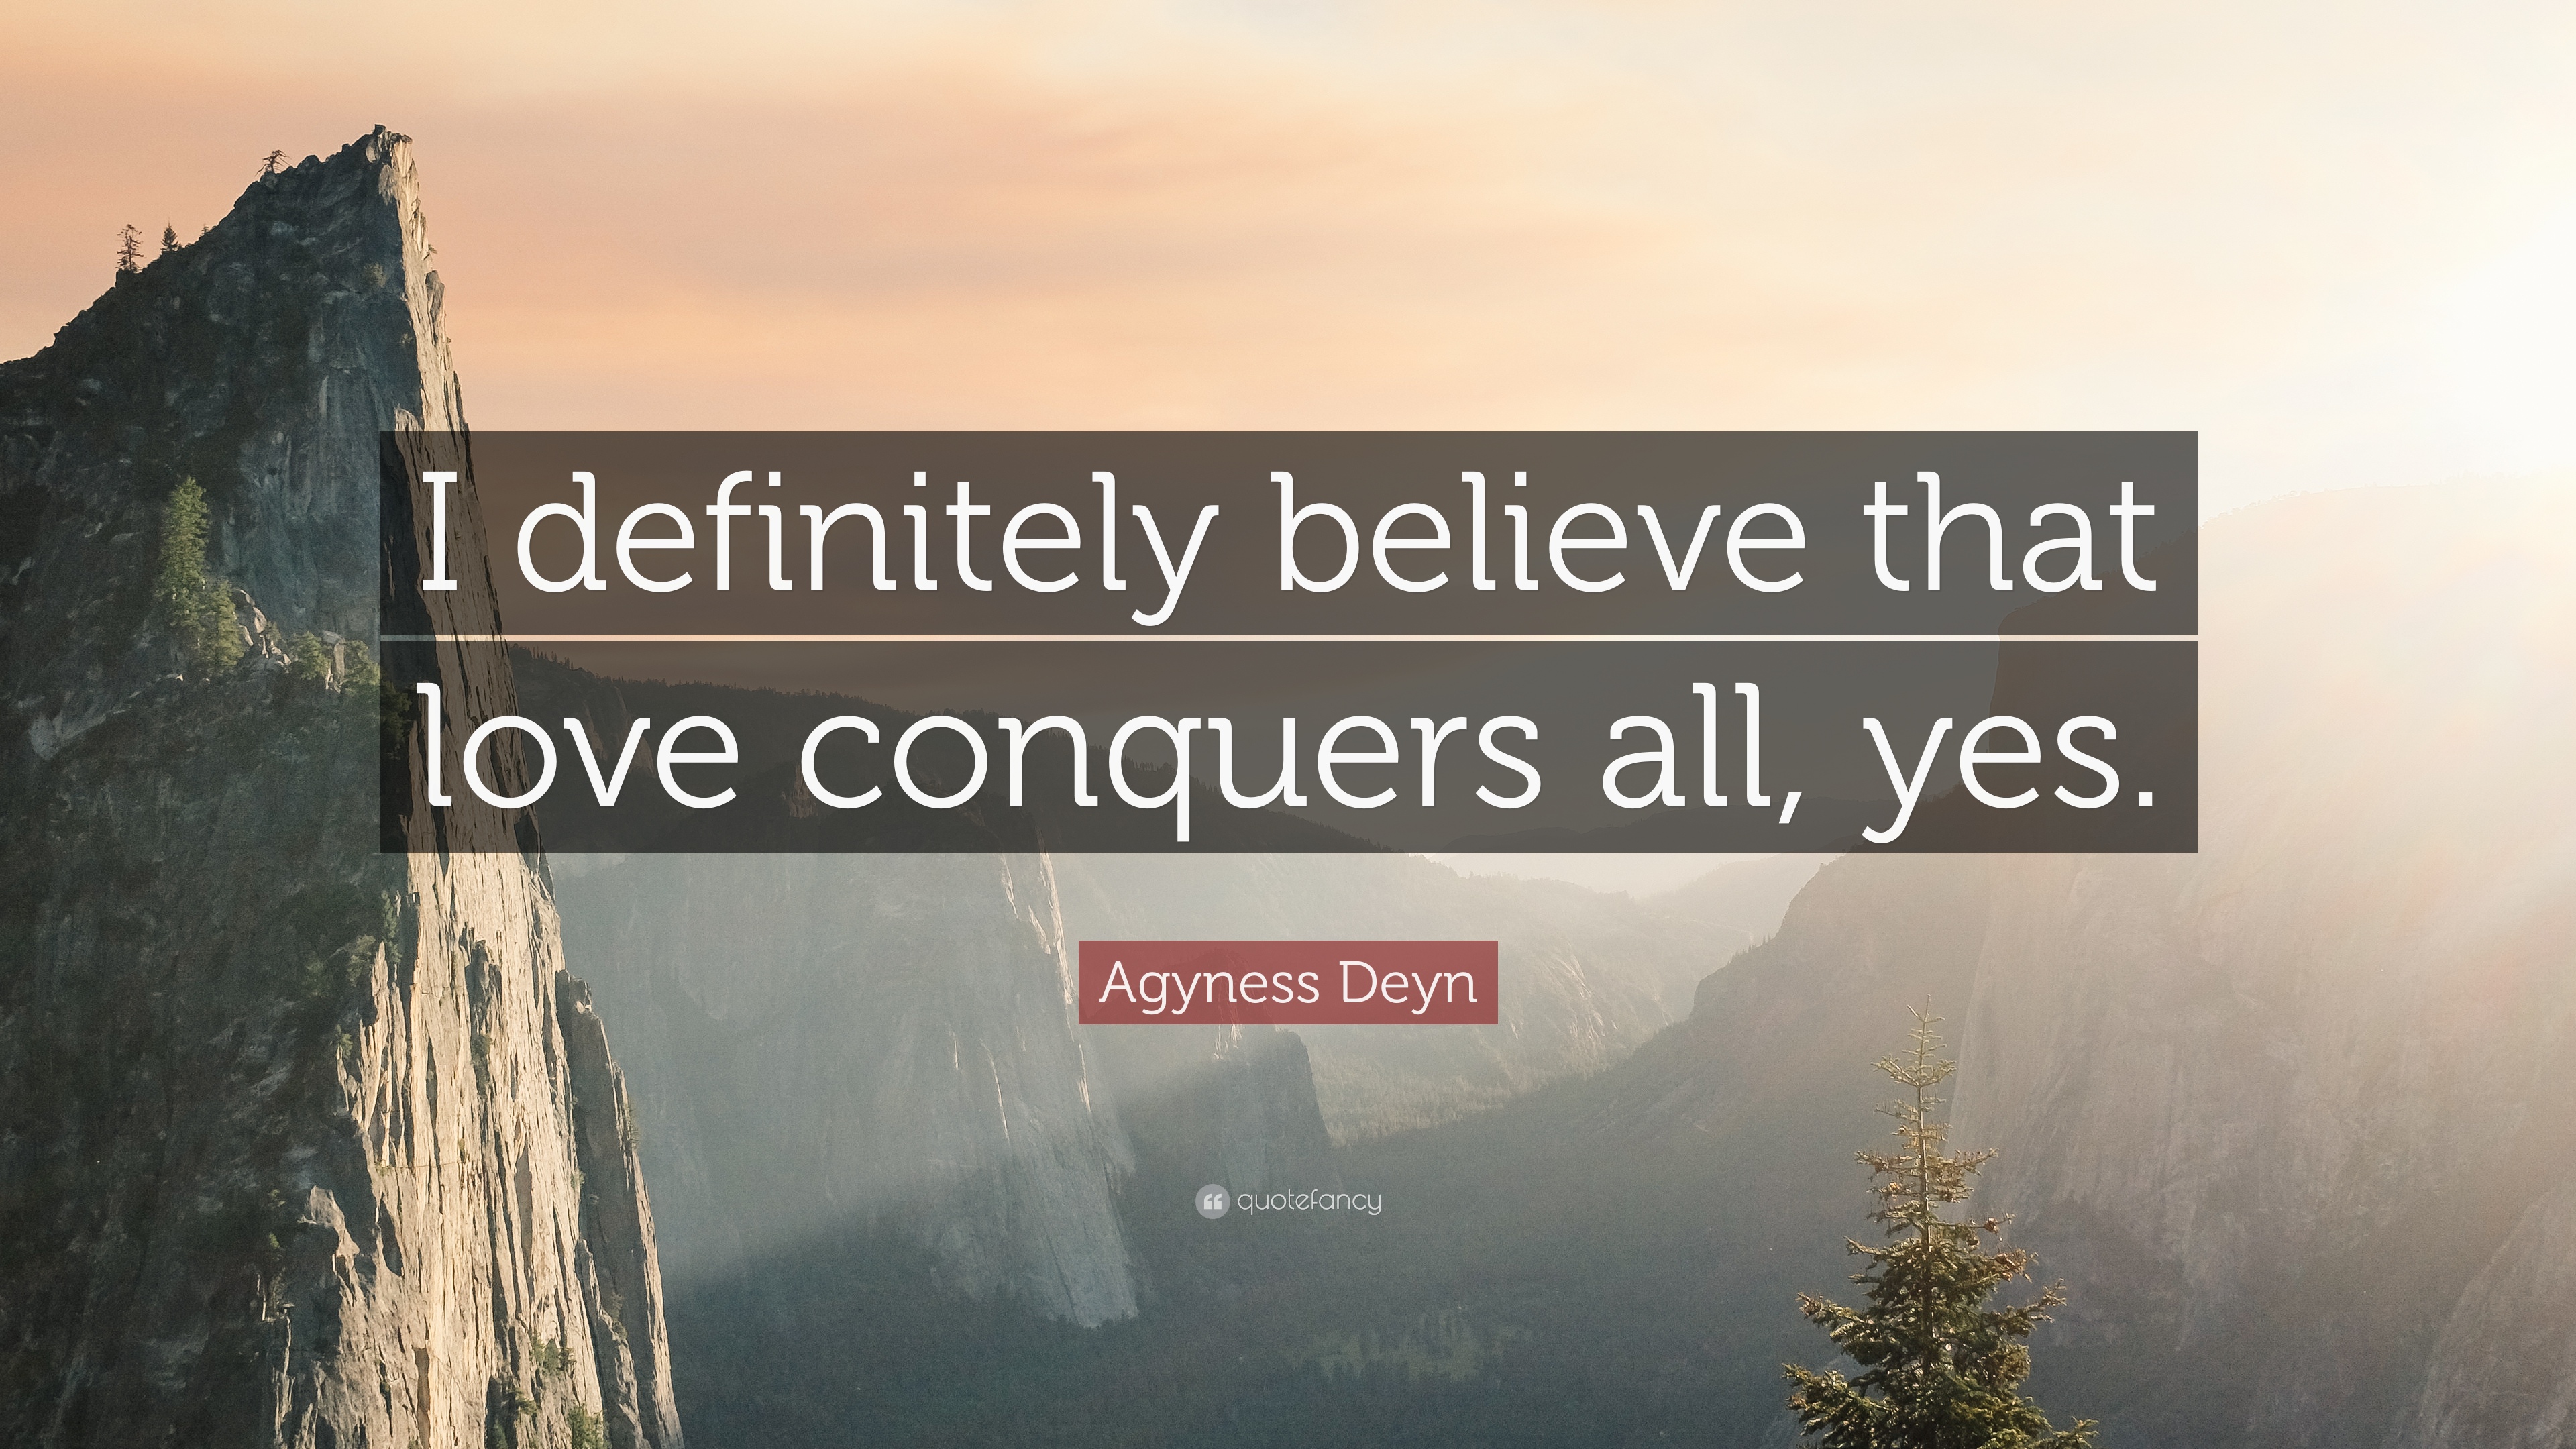 Agyness Deyn Quote: “I definitely believe that love conquers all